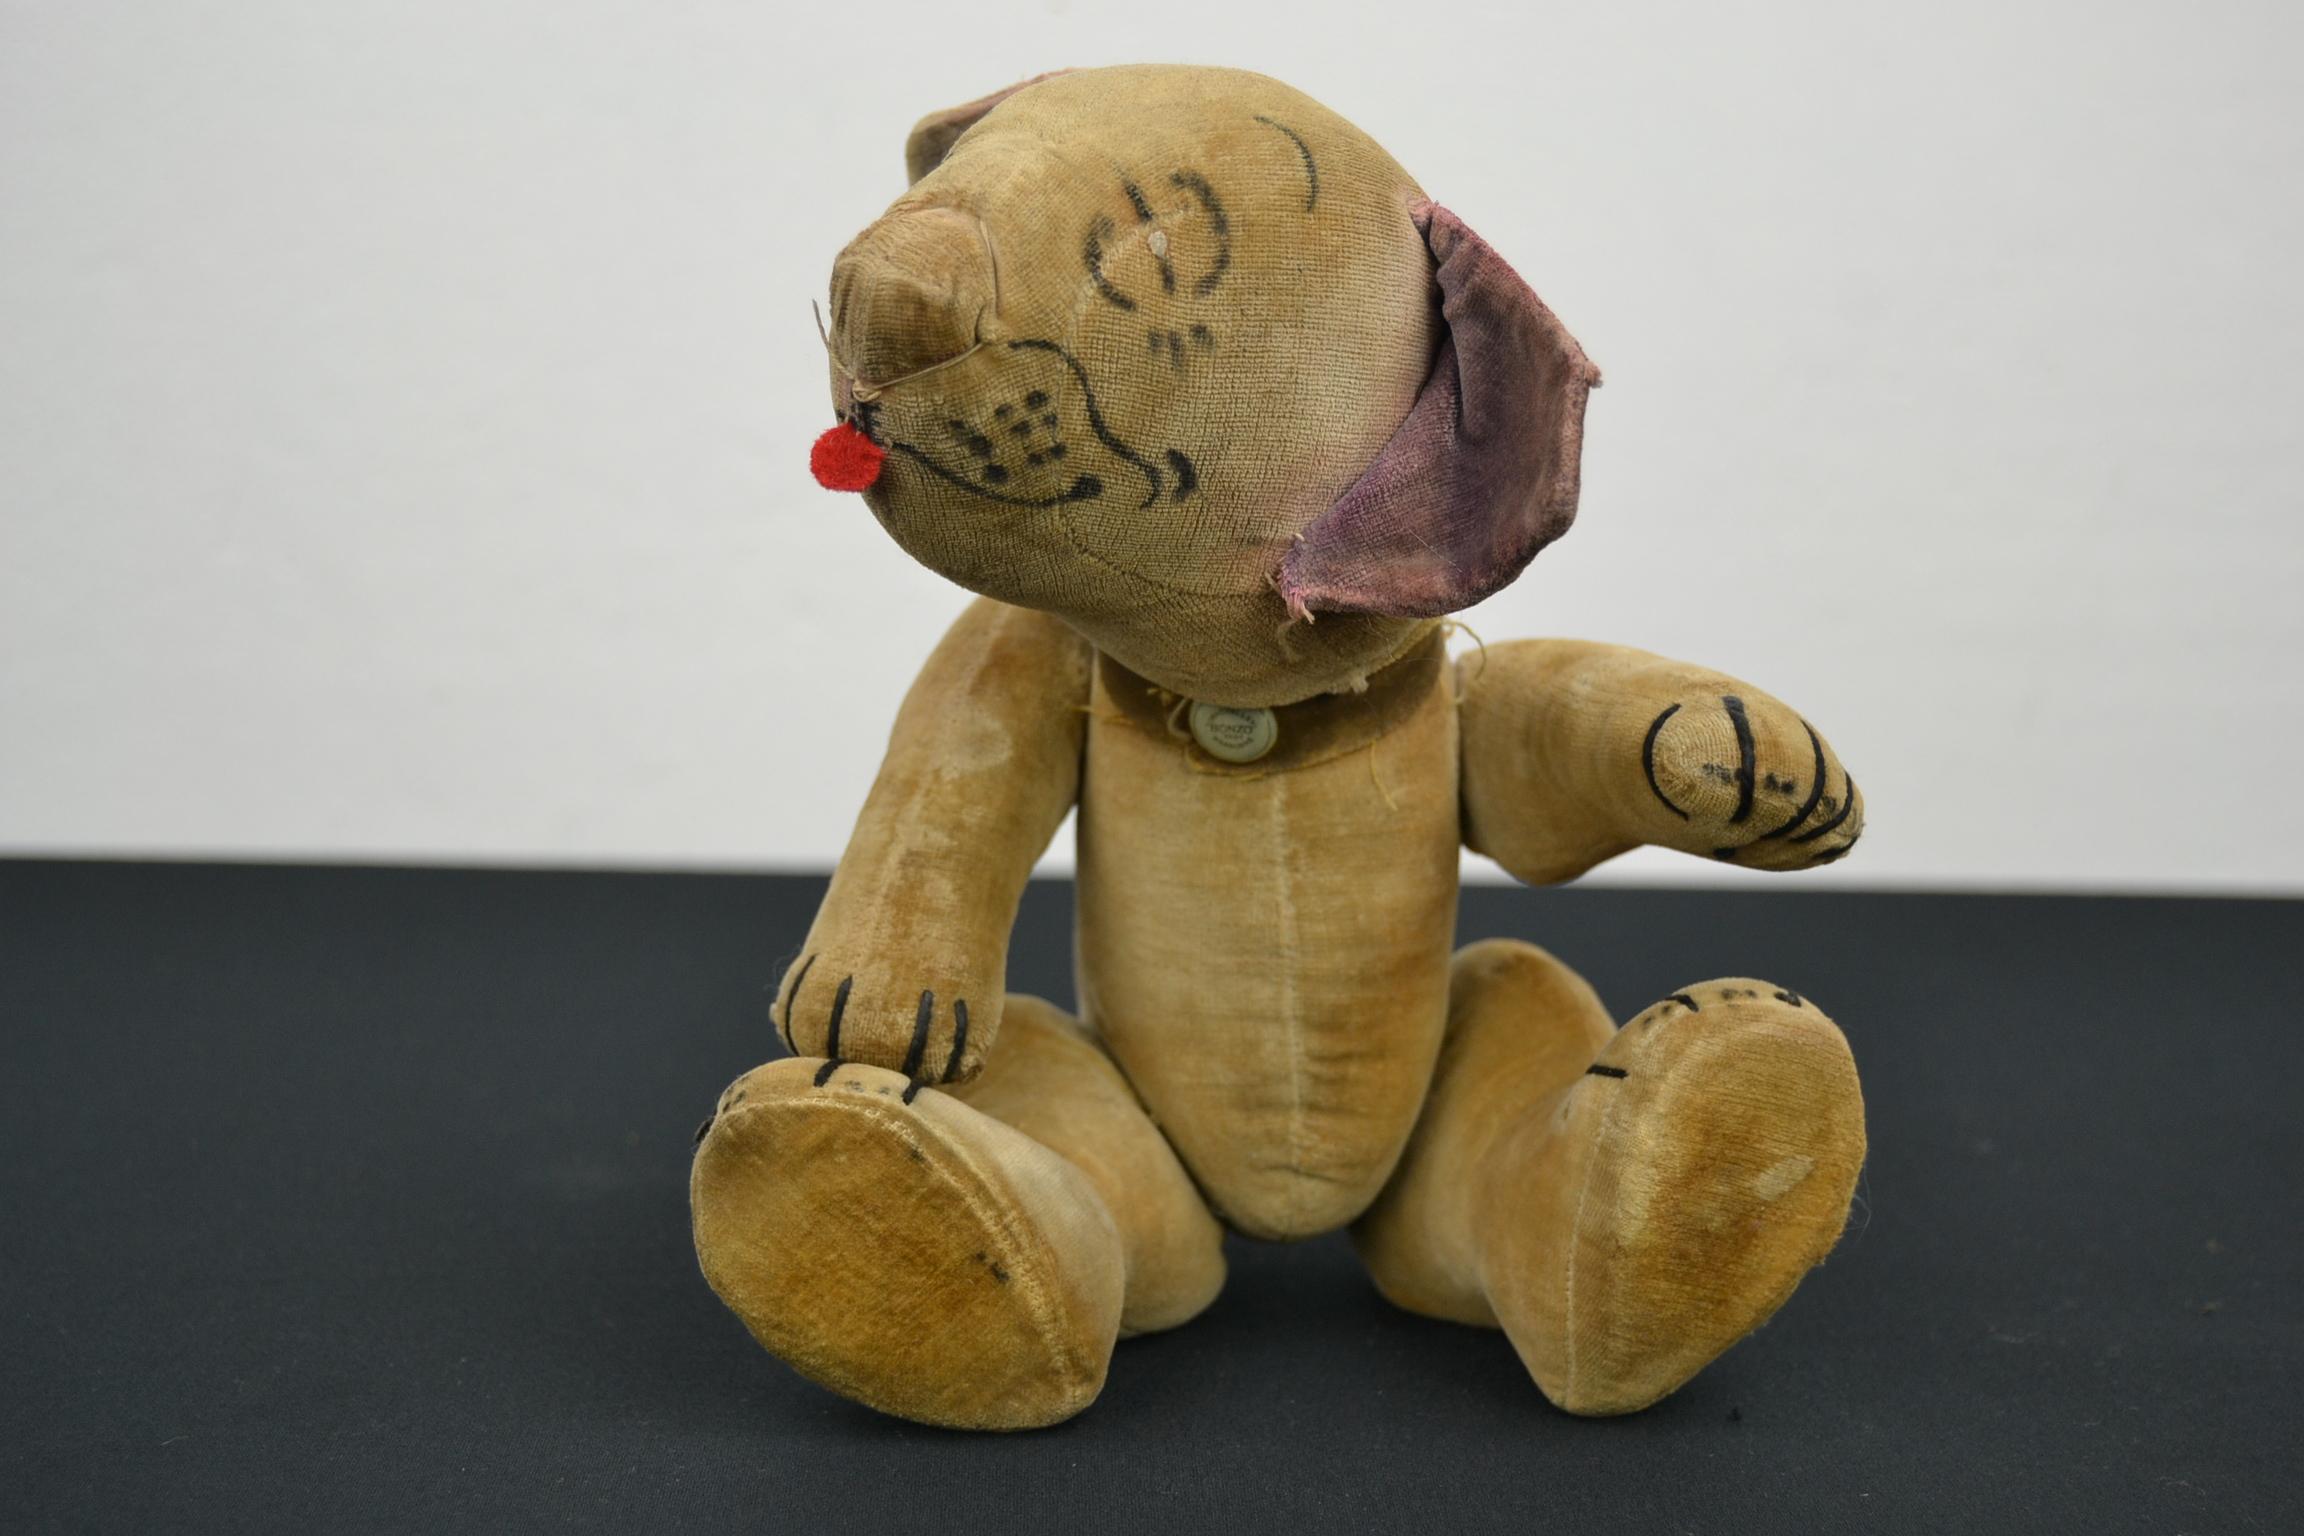 Chad valley comic Bonzo toy dog from the 1930s.
This cream velvet fully jointed Bonzo toy has airbrushed features and a red felt tongue.
He's jointed at neck, shoulders and hips, has stitched claws and still wears his original collar with Chad